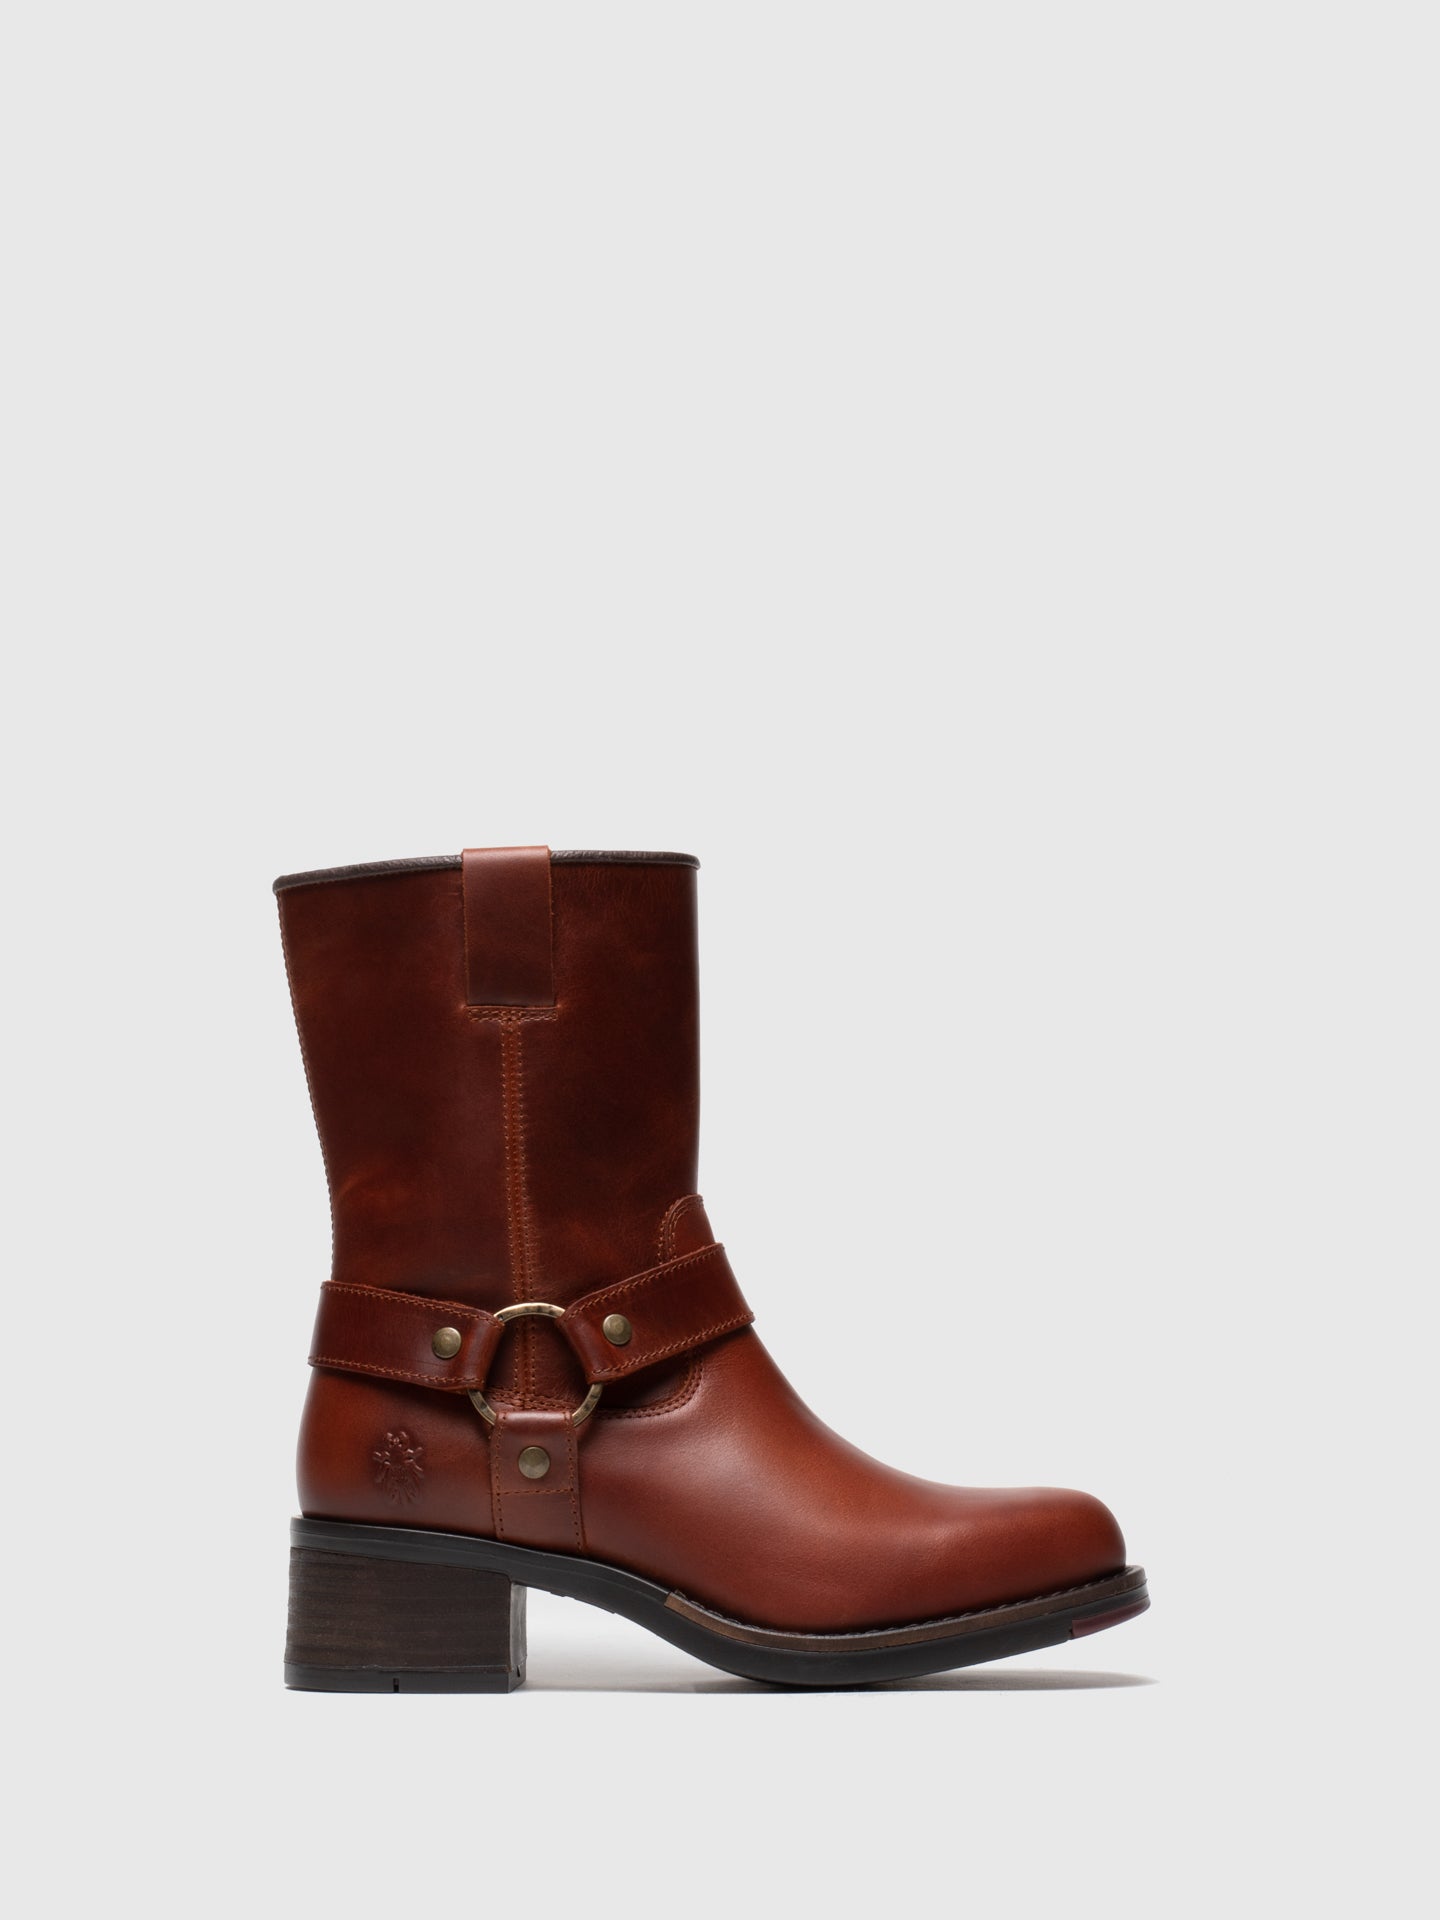 Fly London Firebrick Zip Up Ankle Boots